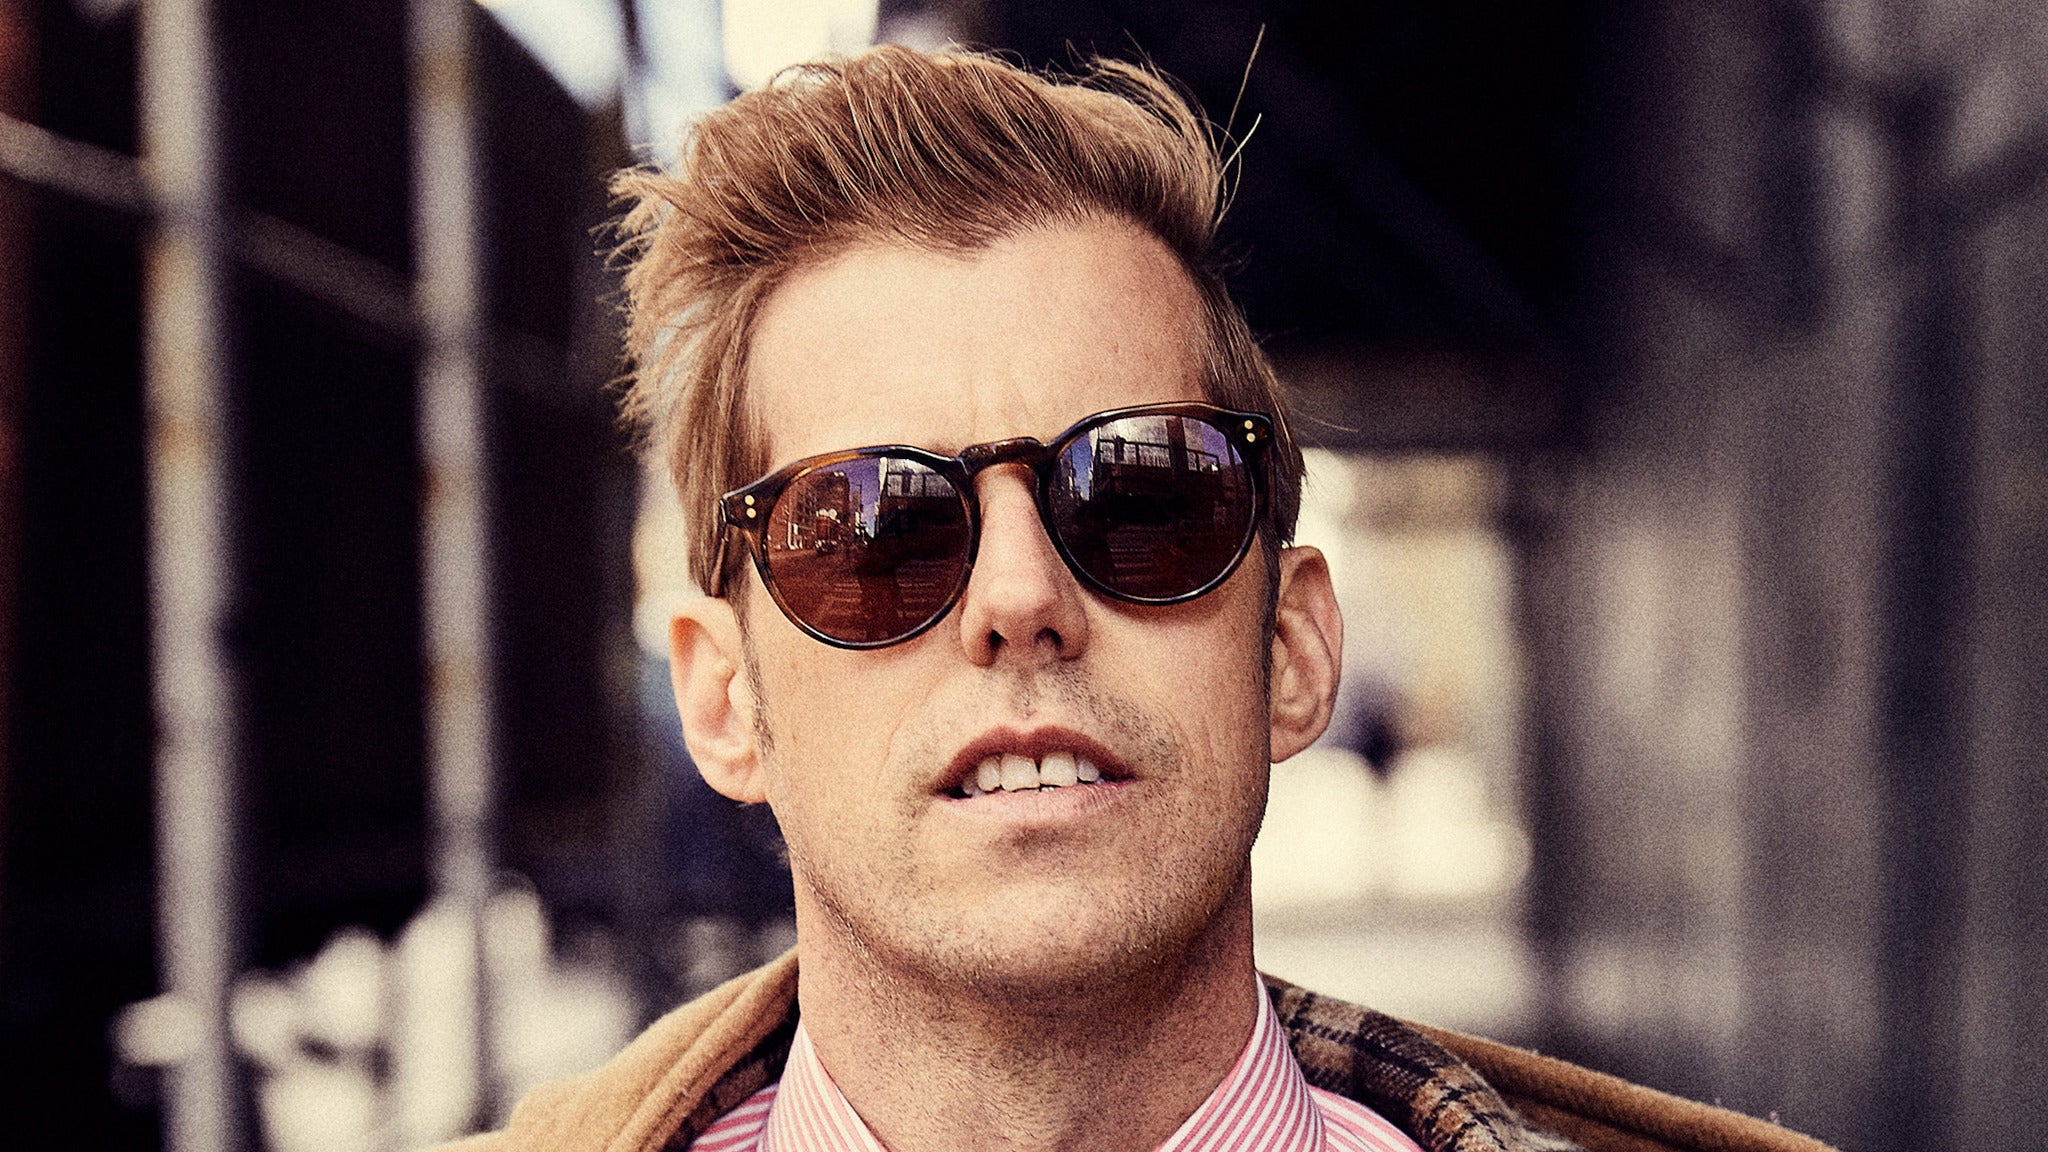 Andrew McMahon: The Three Pianos Tour in Los Angeles promo photo for Pillar presale offer code